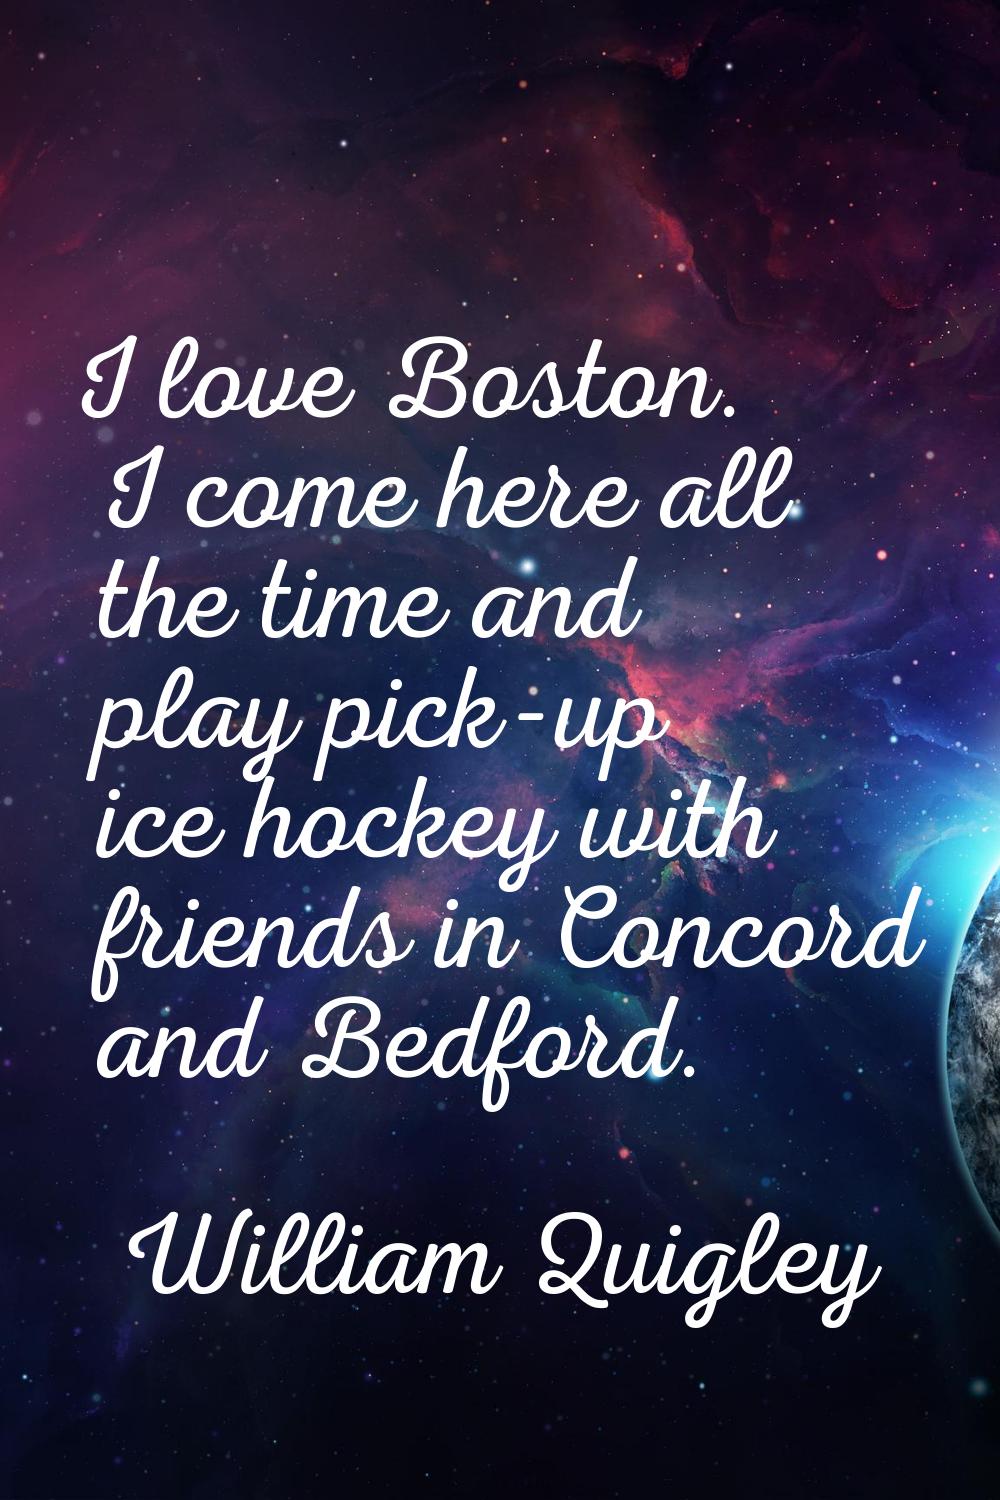 I love Boston. I come here all the time and play pick-up ice hockey with friends in Concord and Bed